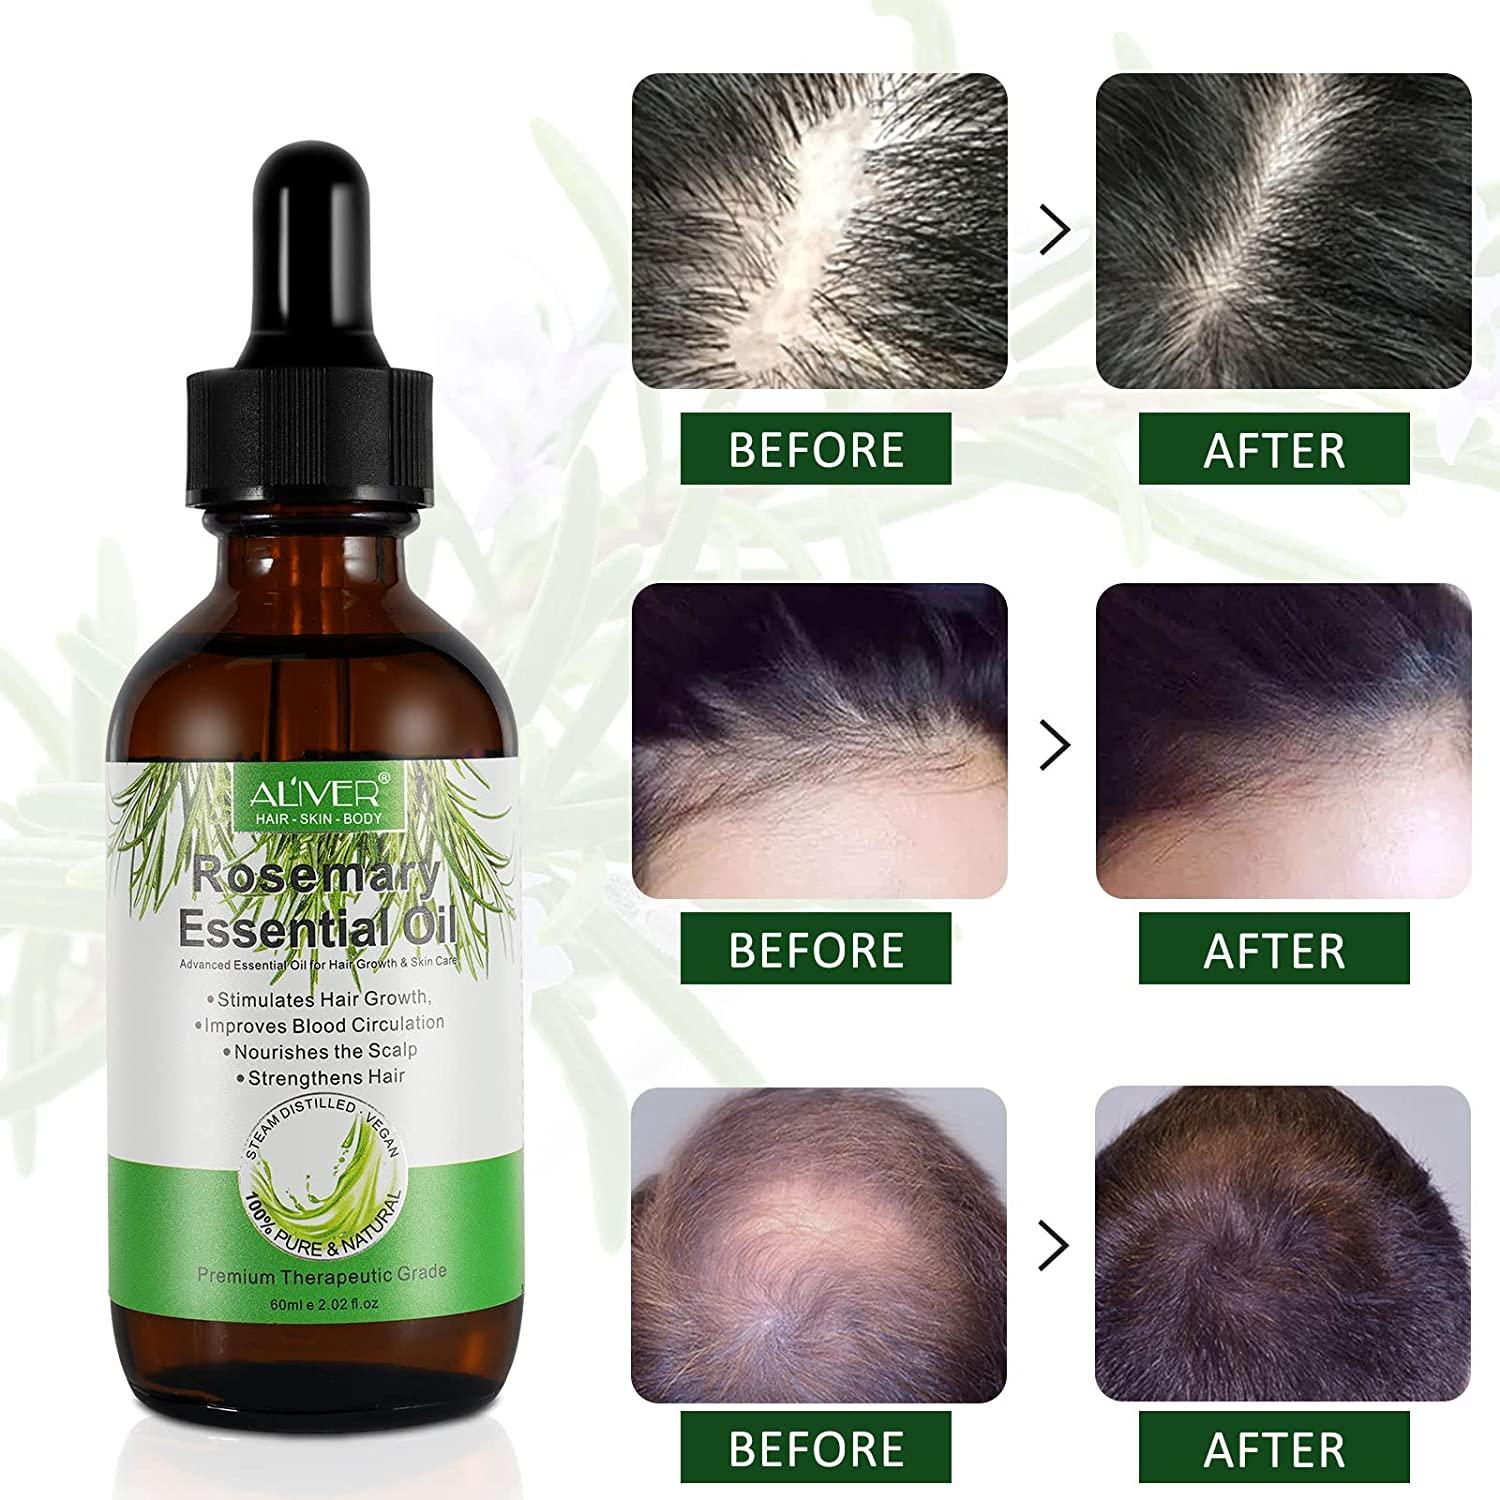 Rosemary Oil for Hair Growth (2.02 fl oz), Organic Rosemary Essential Oil,  100% Pure Natural, Nourishes The Scalp,Stimulates Hair Growth, Improves  Blood Circulation,Rid of Dry Hair, Rosemary Hair Oil 2.02 Fl Oz (